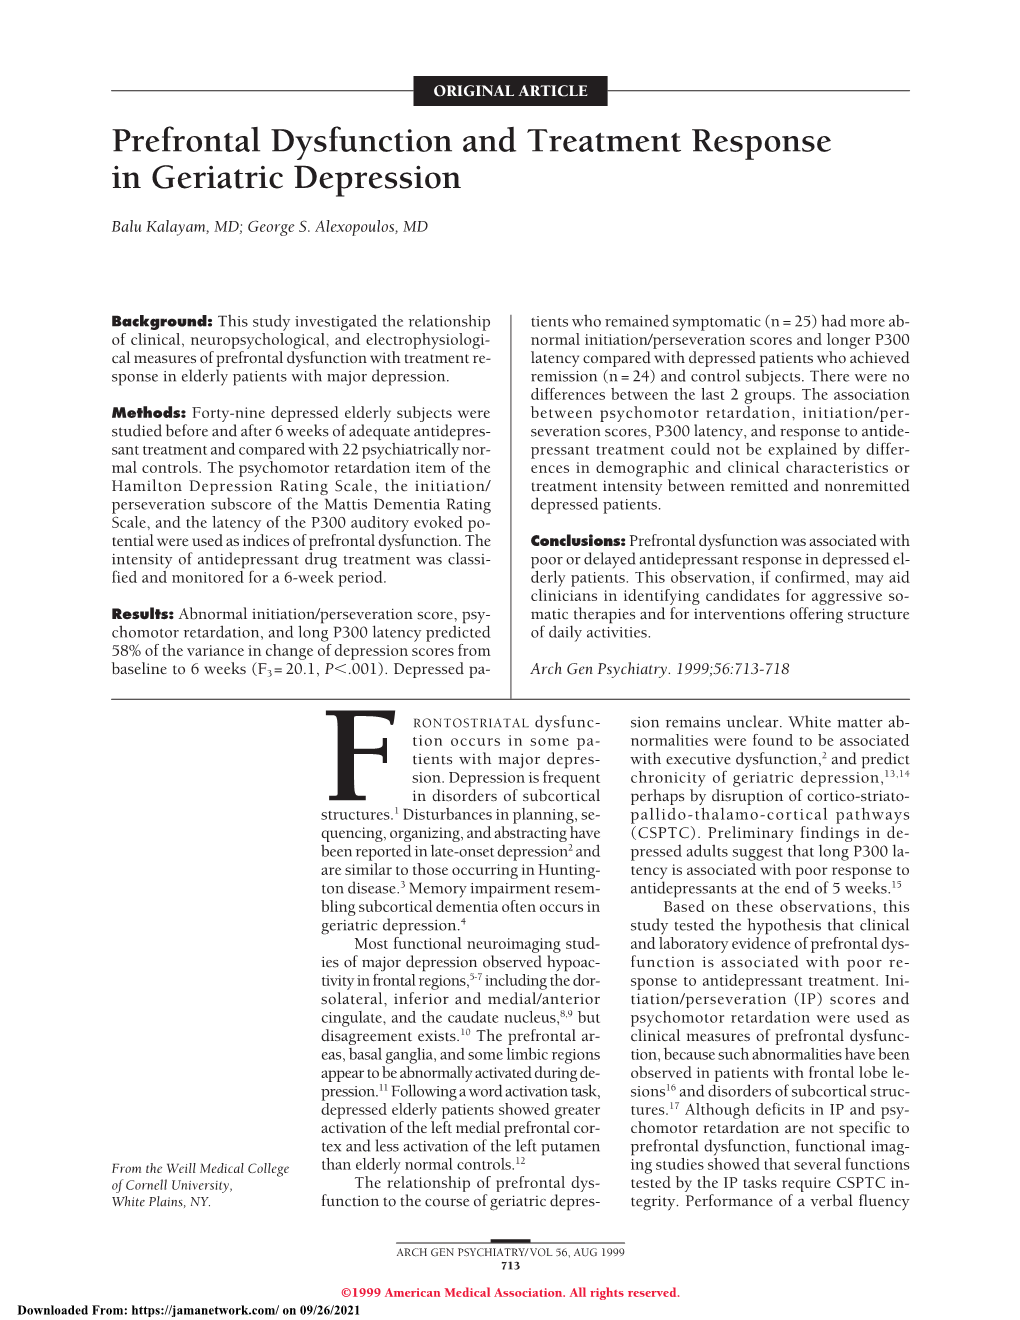 Prefrontal Dysfunction and Treatment Response in Geriatric Depression